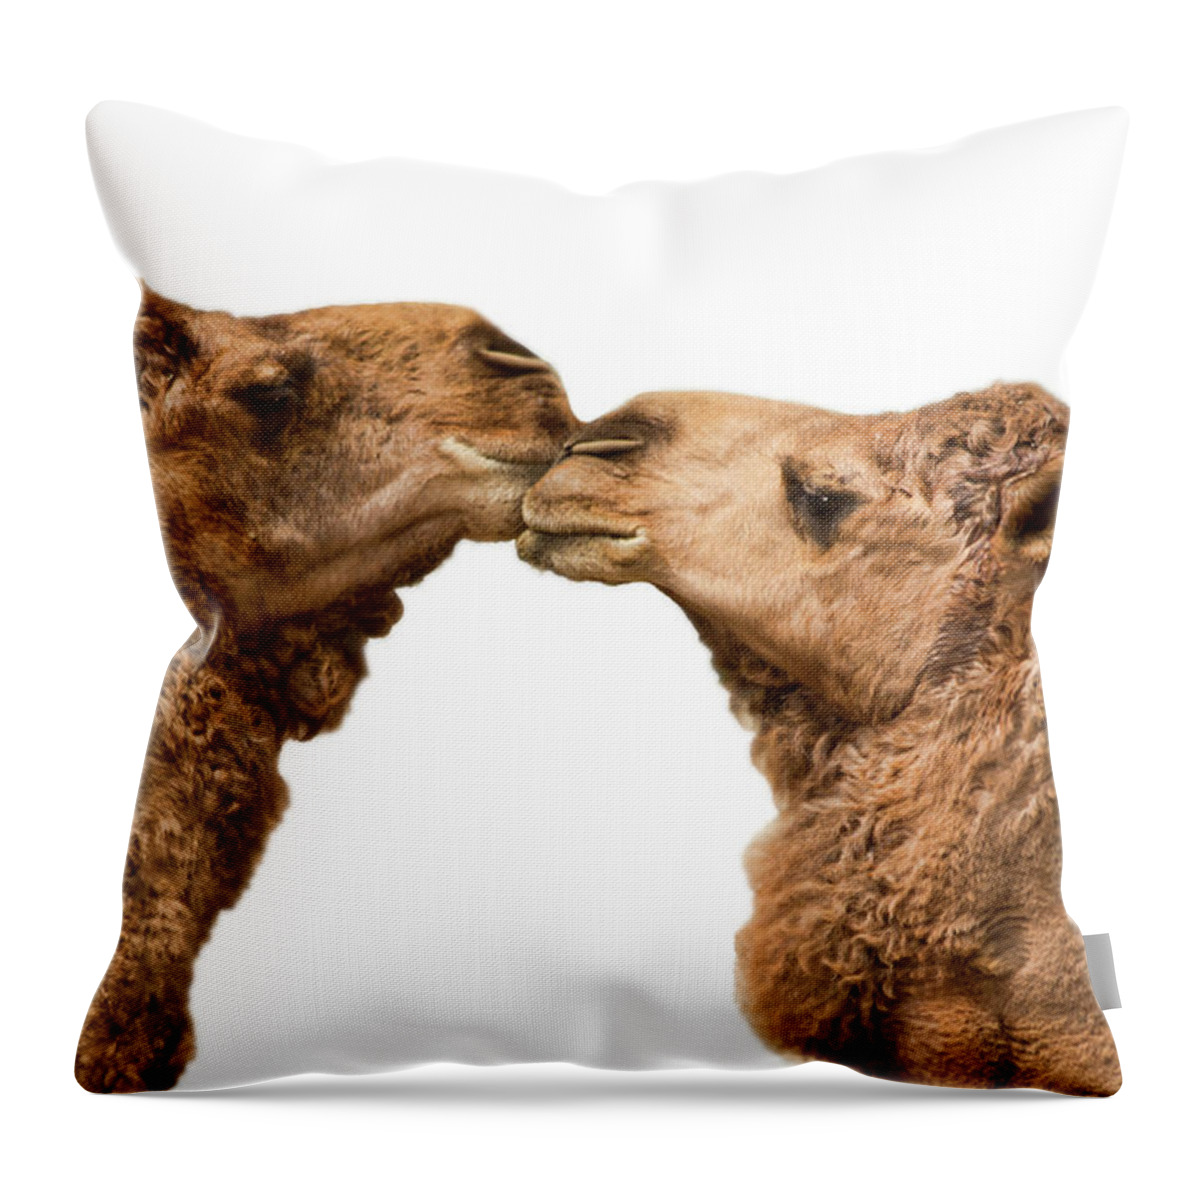 White Background Throw Pillow featuring the photograph Camels Kissing On White by Melinda Moore